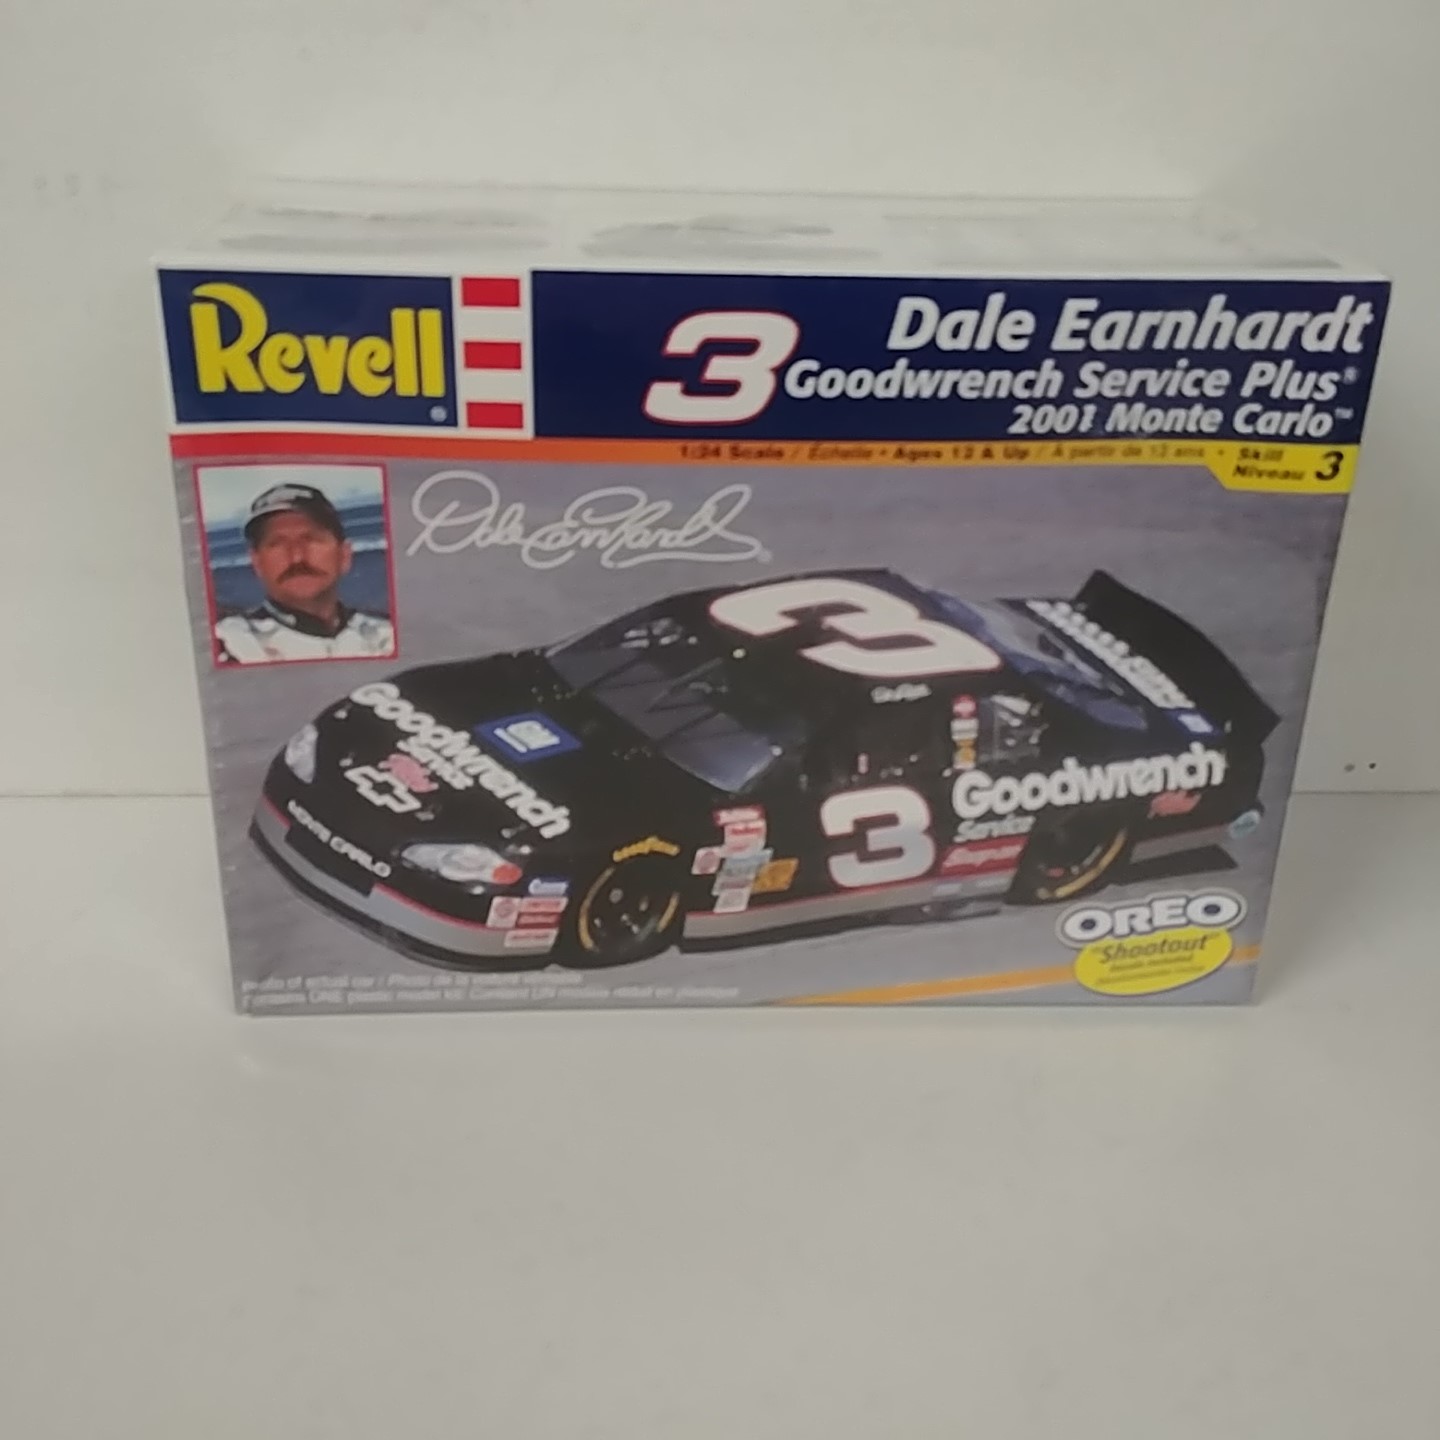 2001 Dale Earnhardt 1/24th Goodwrench Monte Carlo model kit by Revell